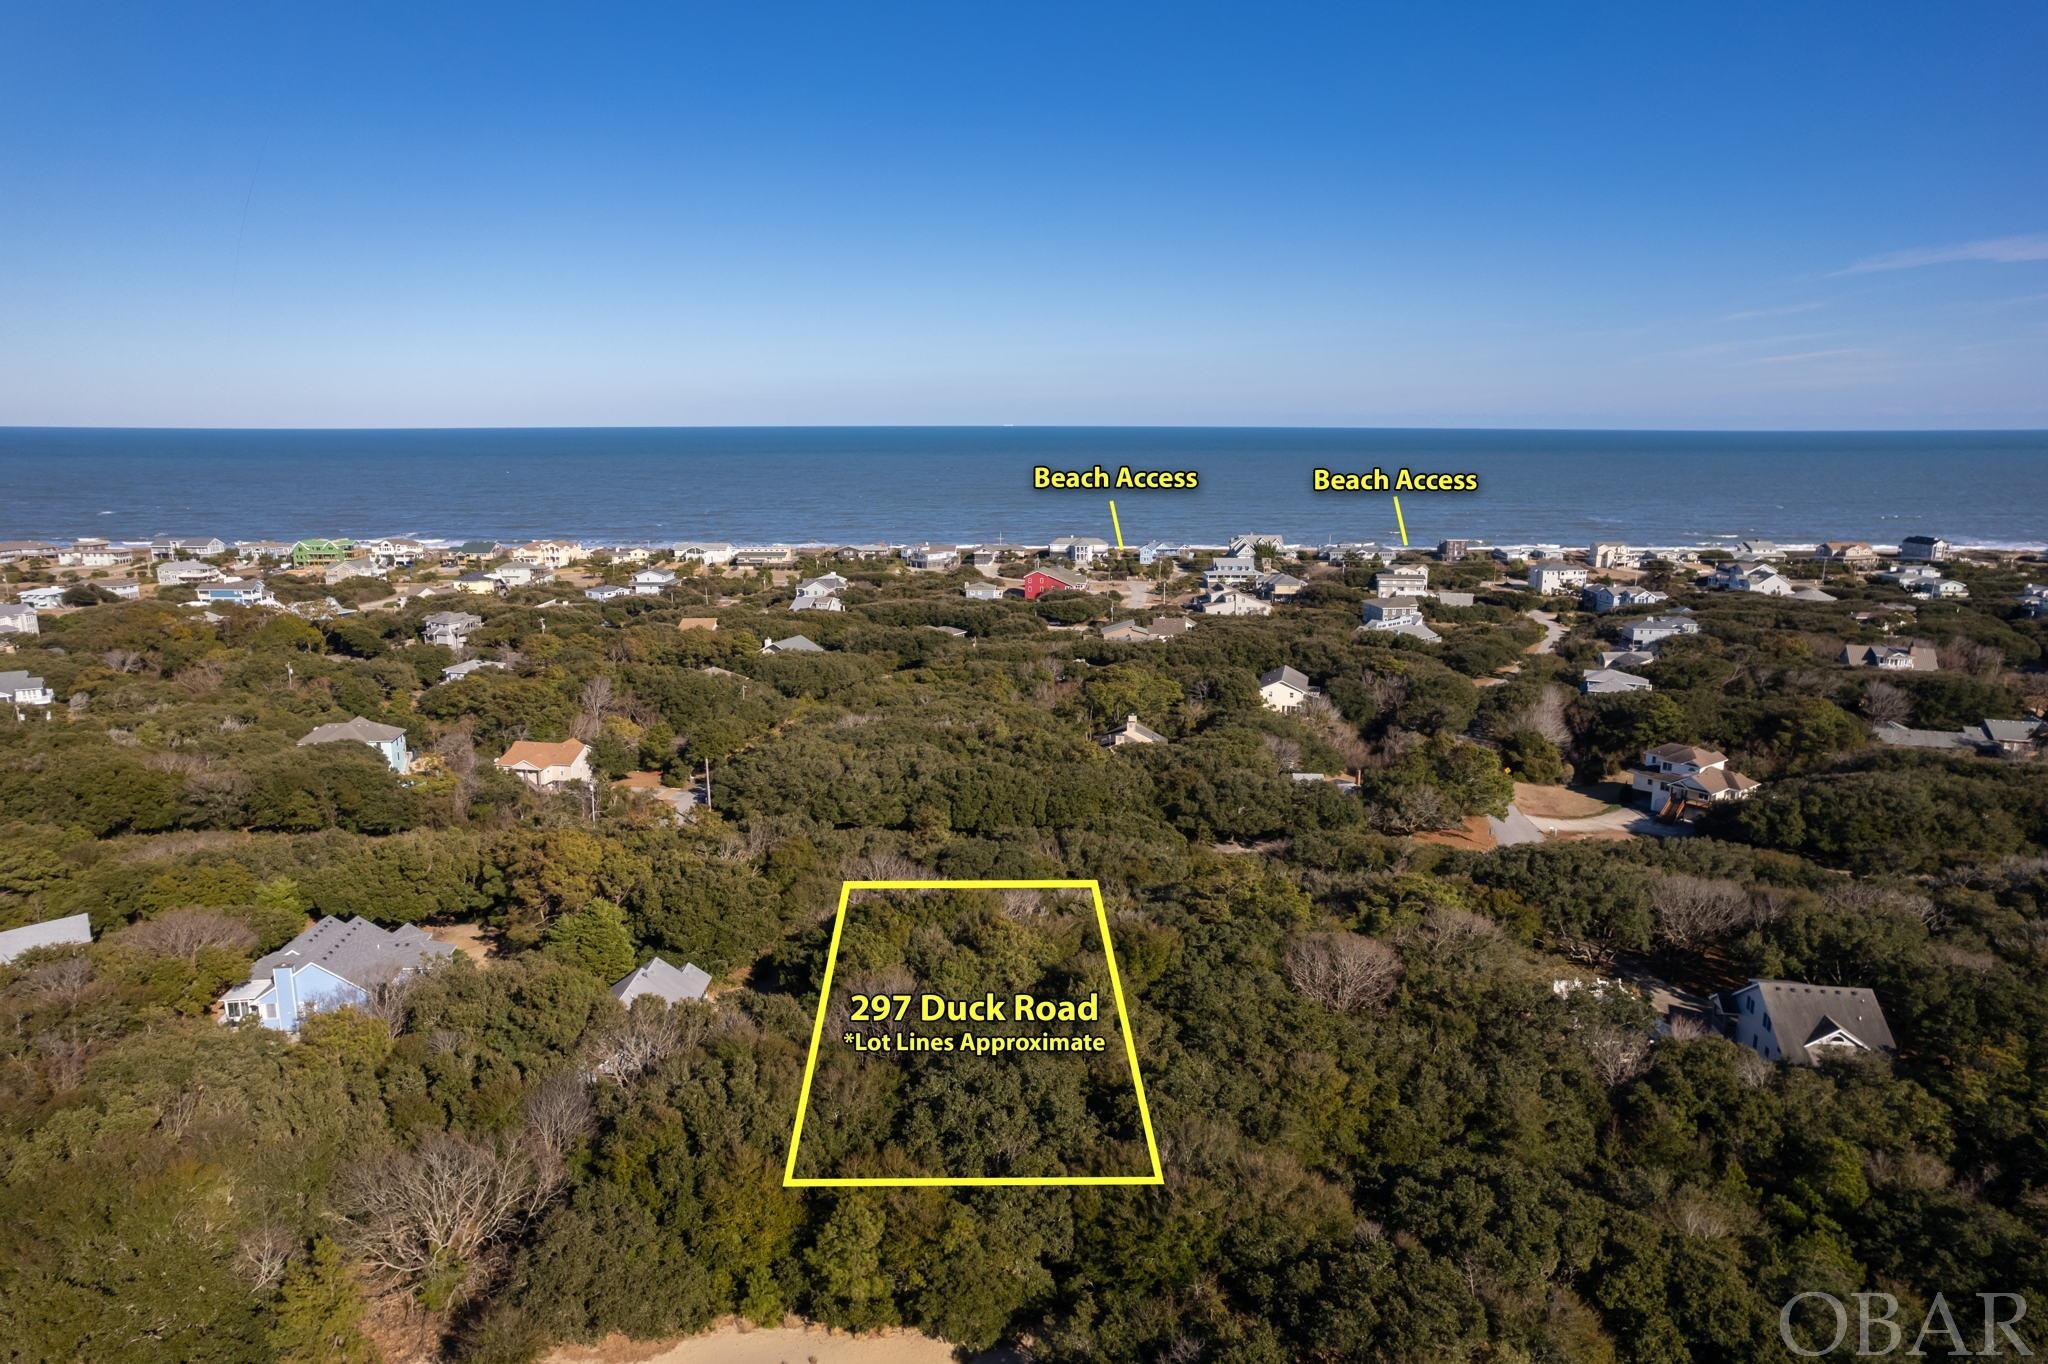 BEAUTIFUL HOME SITE/AMAZING LOCATION IN HIGHLY DESIRABLE SOUTHERN SHORES!!  HIGH AND DRY IN X FLOOD ZONE!  Don't miss this opportunity to build your own, custom home on this impressive lot!  This 28,000 sq ft property is within walking distance to Southern Shores beach accesses including Hillcrest Beach which has parking, showers, volleyball and lifeguards in season!  Southern Shores Civic Association is Voluntary.  SSCA dues are $65 annually for residents/second home owners and $95 for rental property owners. Access to three soundside marinas with boat launches and picnic areas, private sound beach, playgrounds, basketball & soccer field.  30+ beach accesses with private parking. For an additional $25 a year, join the SSCA tennis club and boat club.  WEBSITE: www.sscaobx.org.  360 Pano Link: https://kuula.co/share/N9jjM?logo=1&info=1&fs=1&vr=0&sd=1&thumbs=1